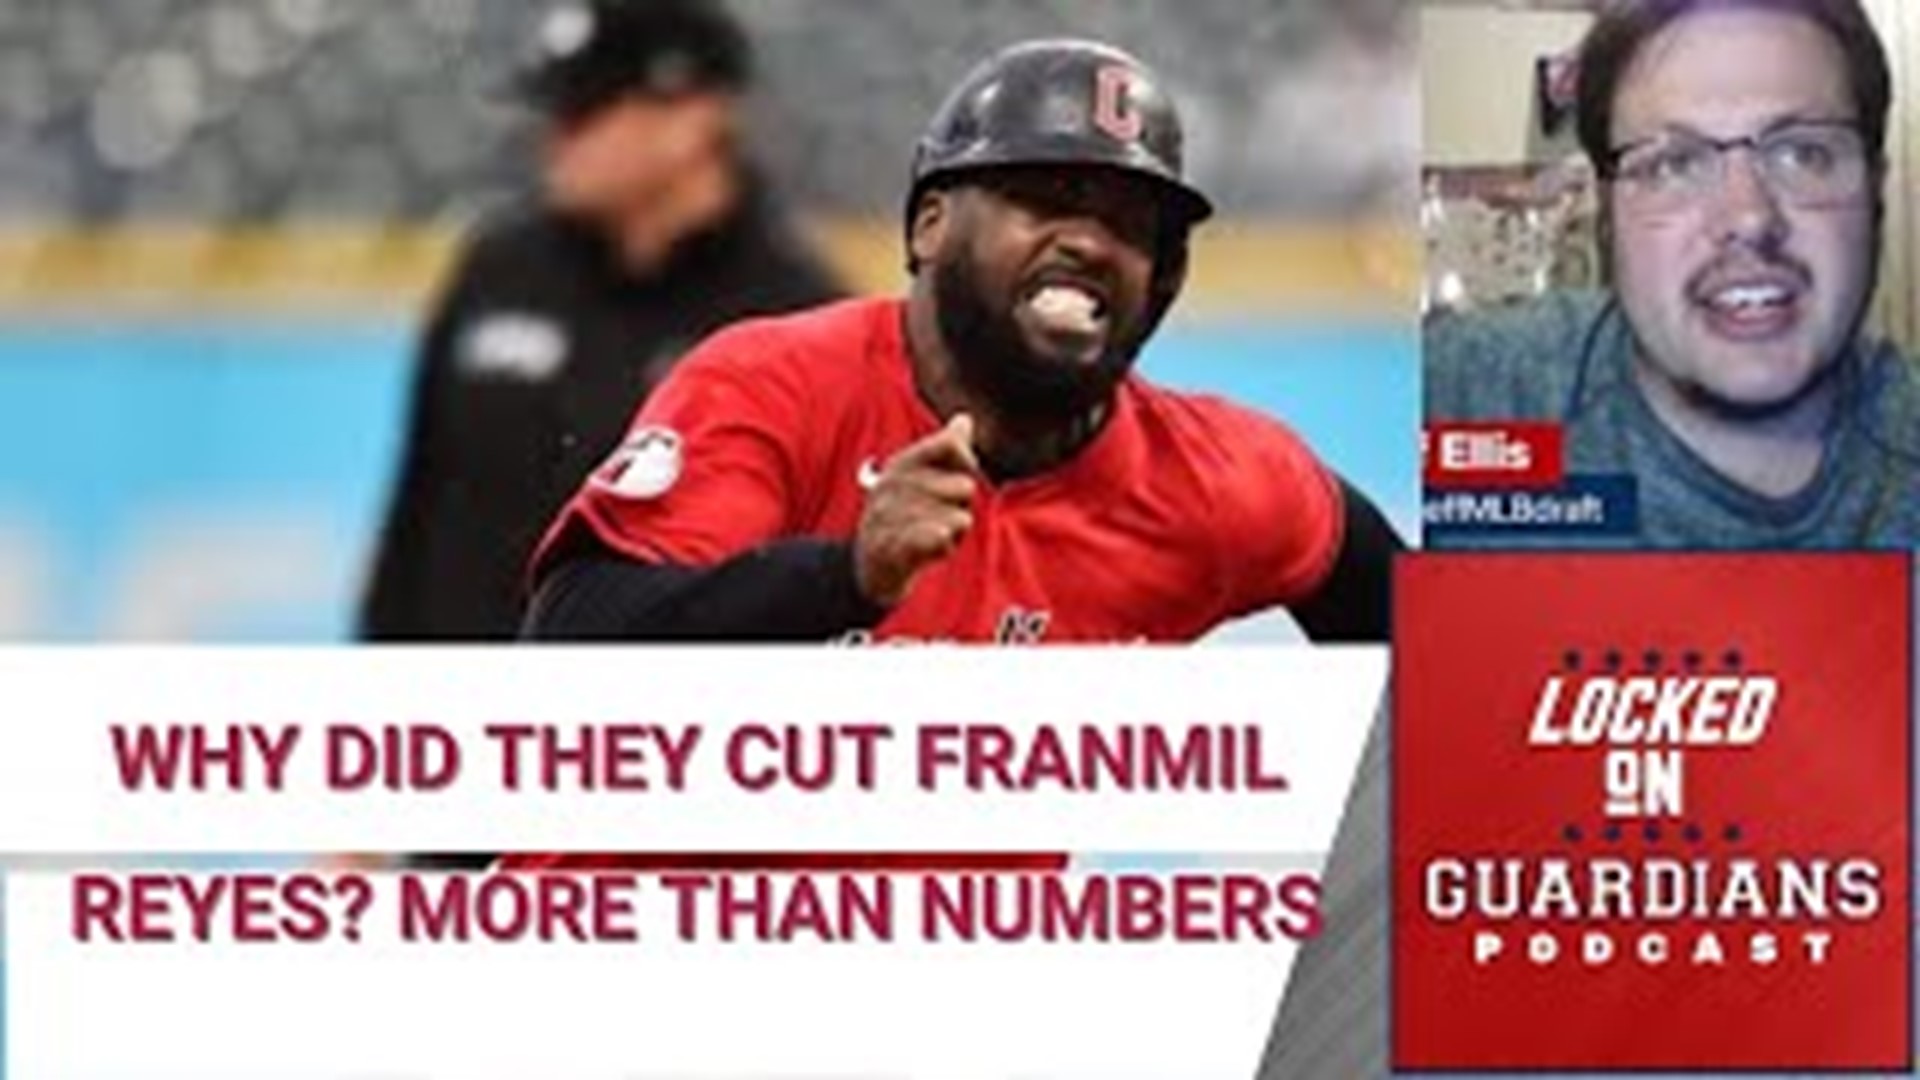 Franmil Reyes claimed by Chicago Cubs, ending Guardians tenure